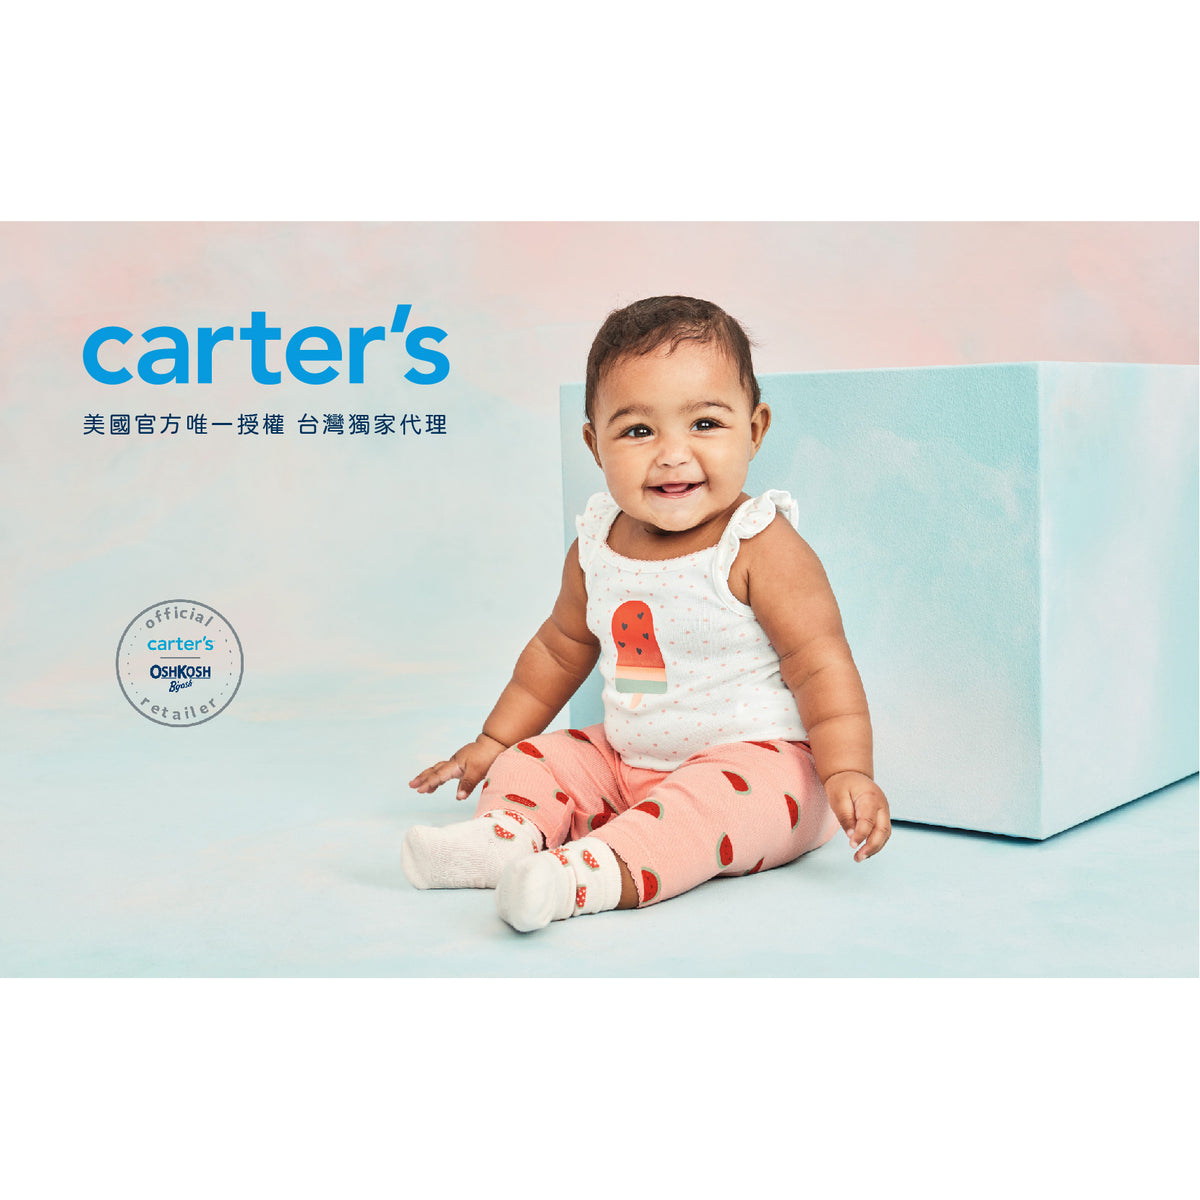 Carter's The cutest butt-covering shirt in history (6M-24M)